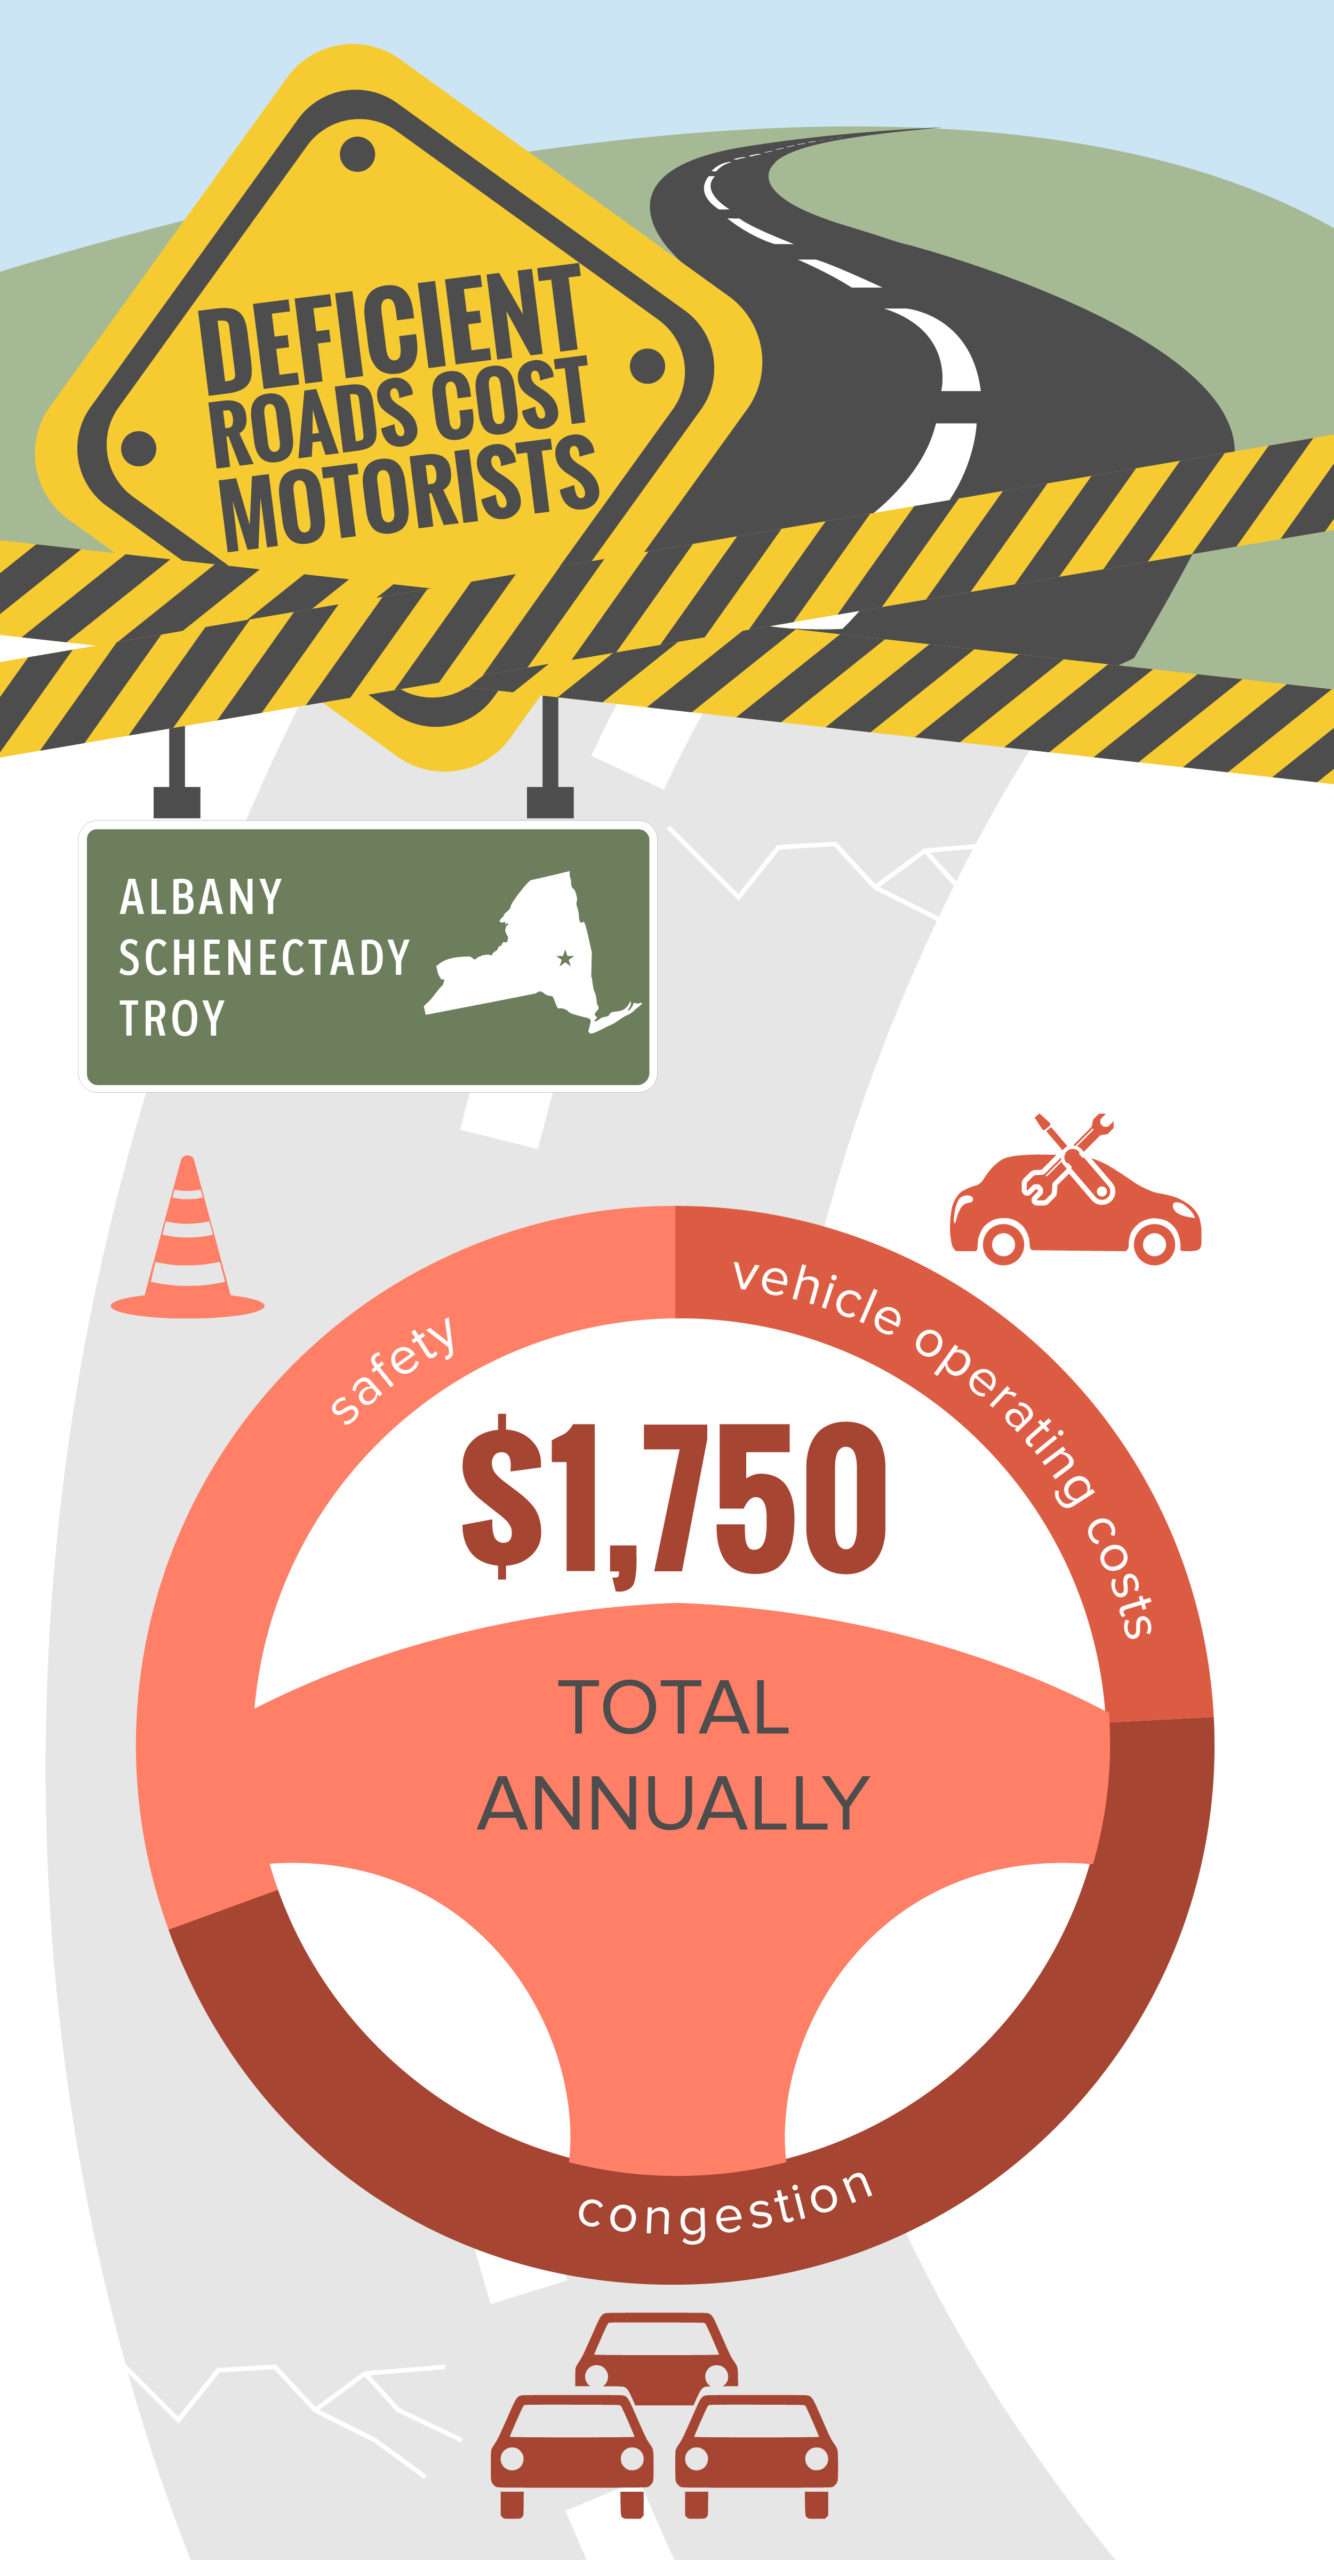 Albany-Schenectady-Troy Deficient Roads Cost to Motorists Infographic – January 2022